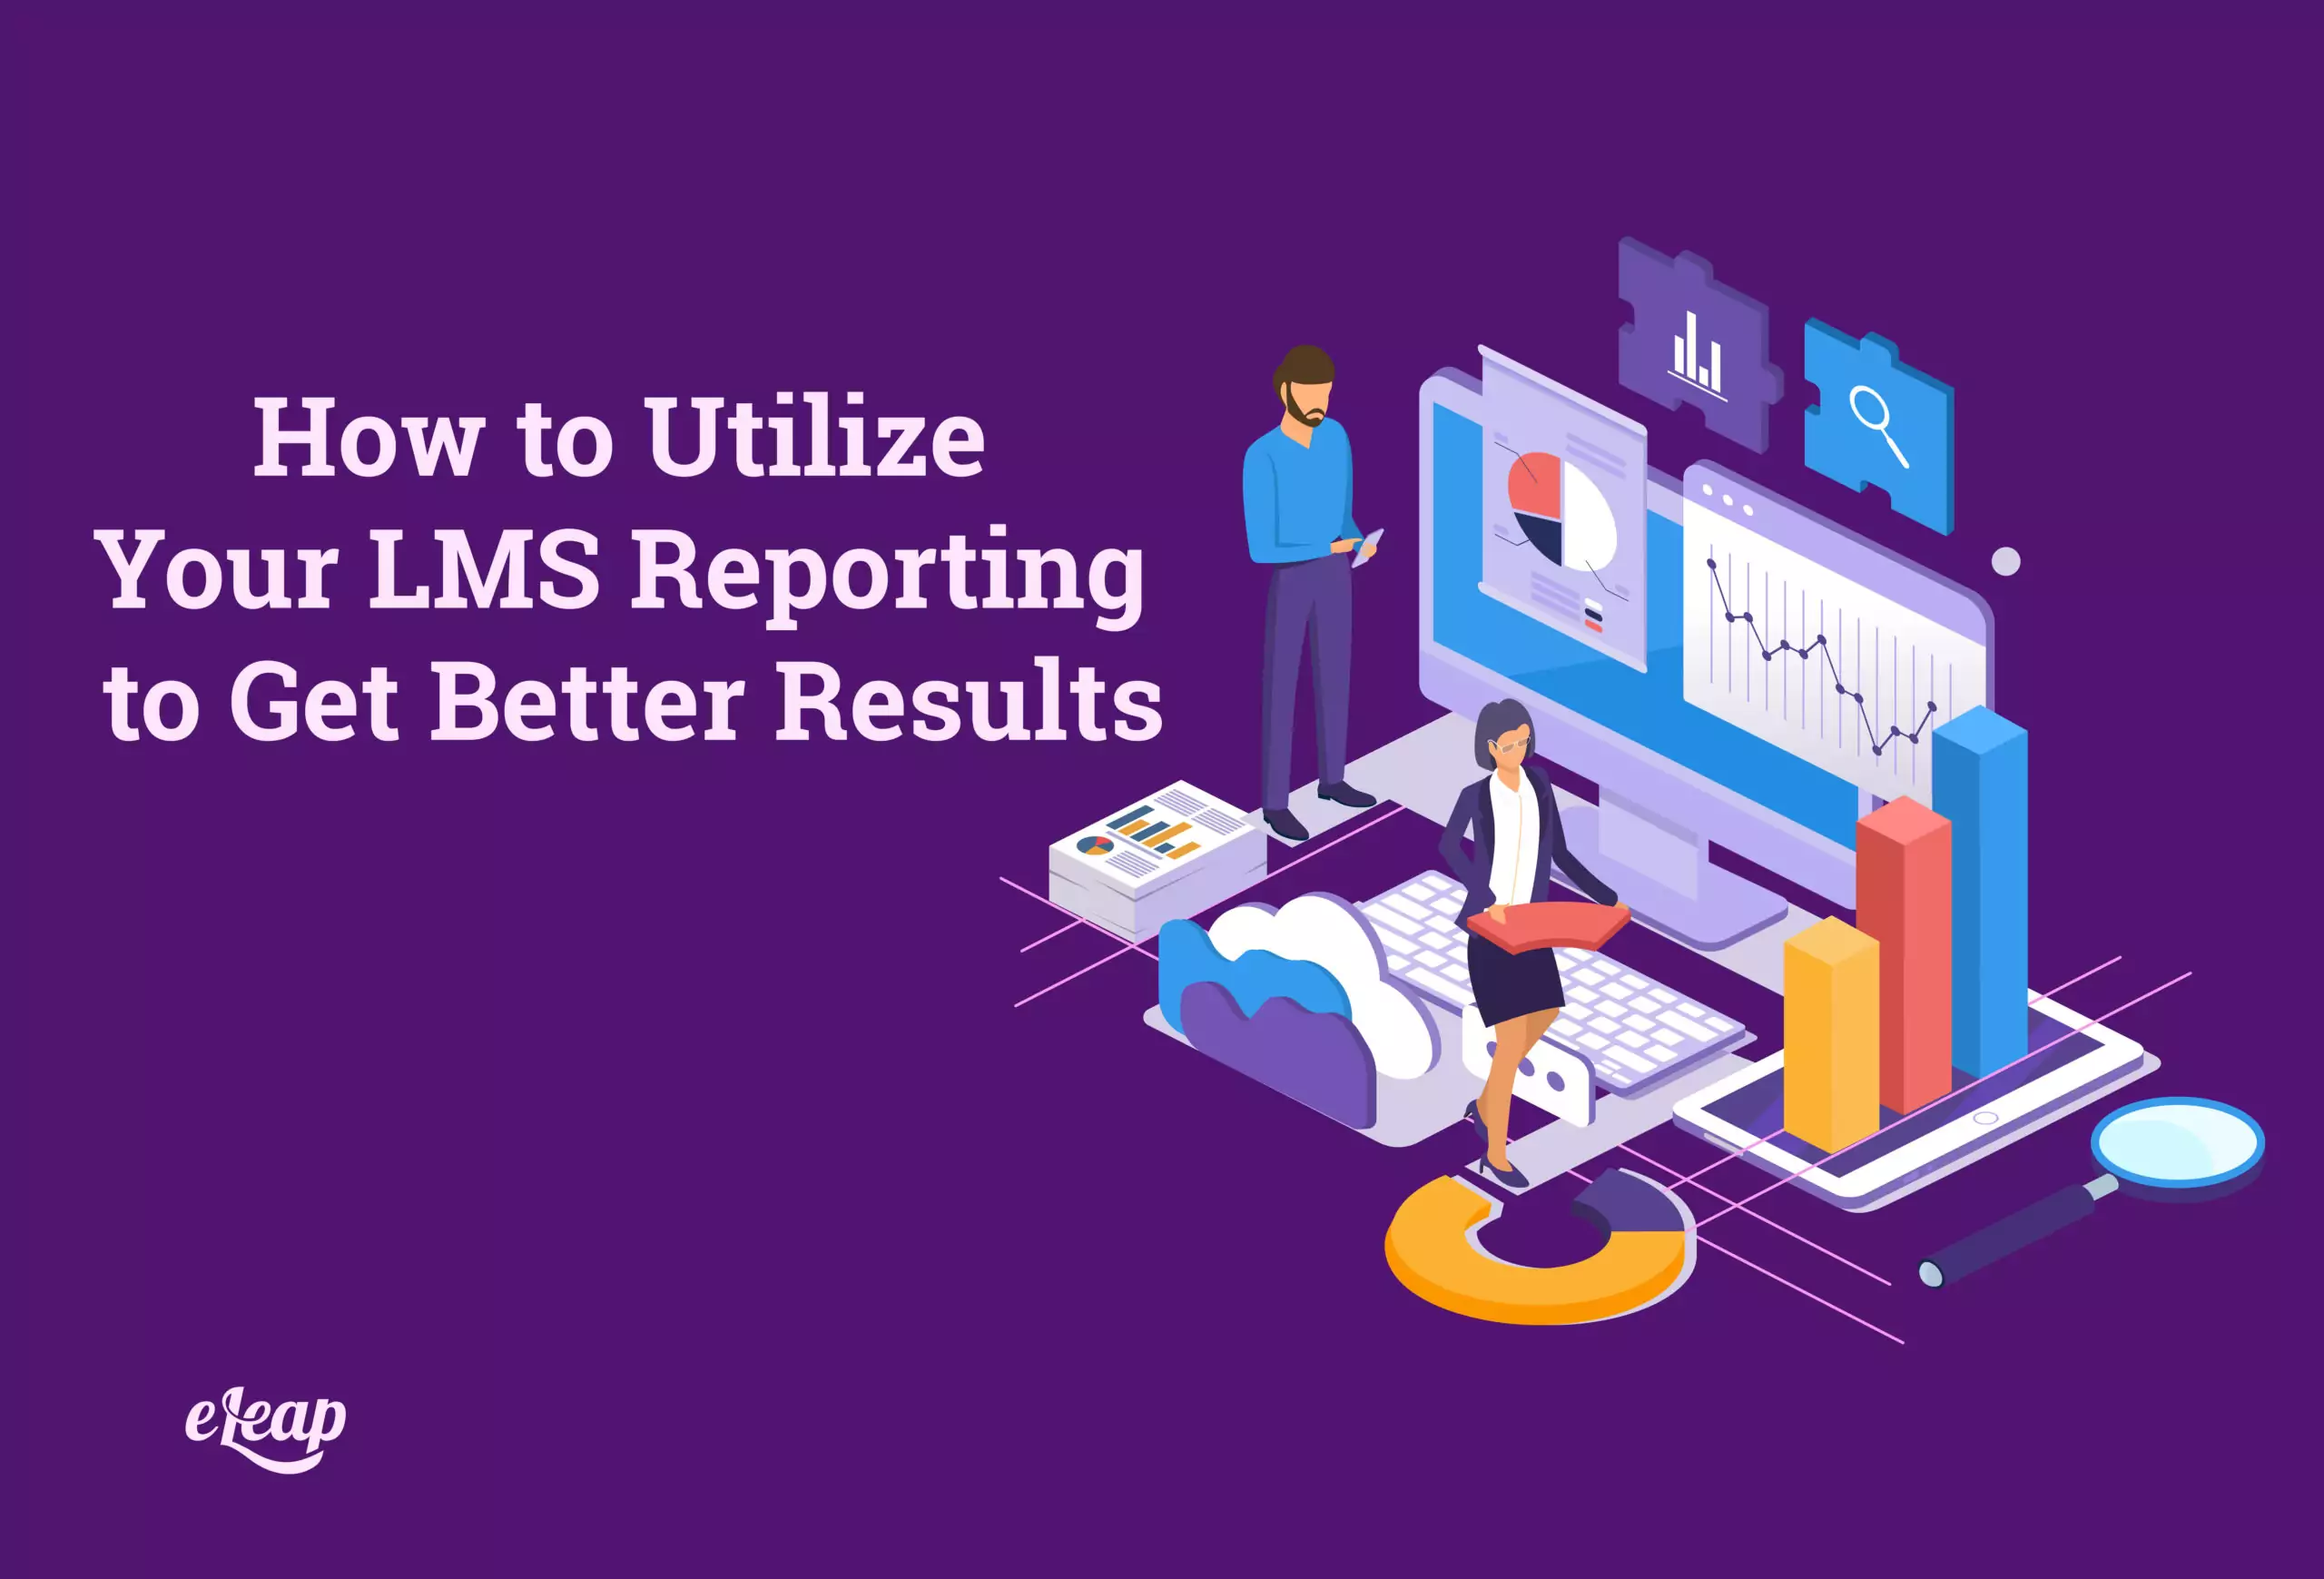 How to Utilize Your LMS Reporting to Get Better Results